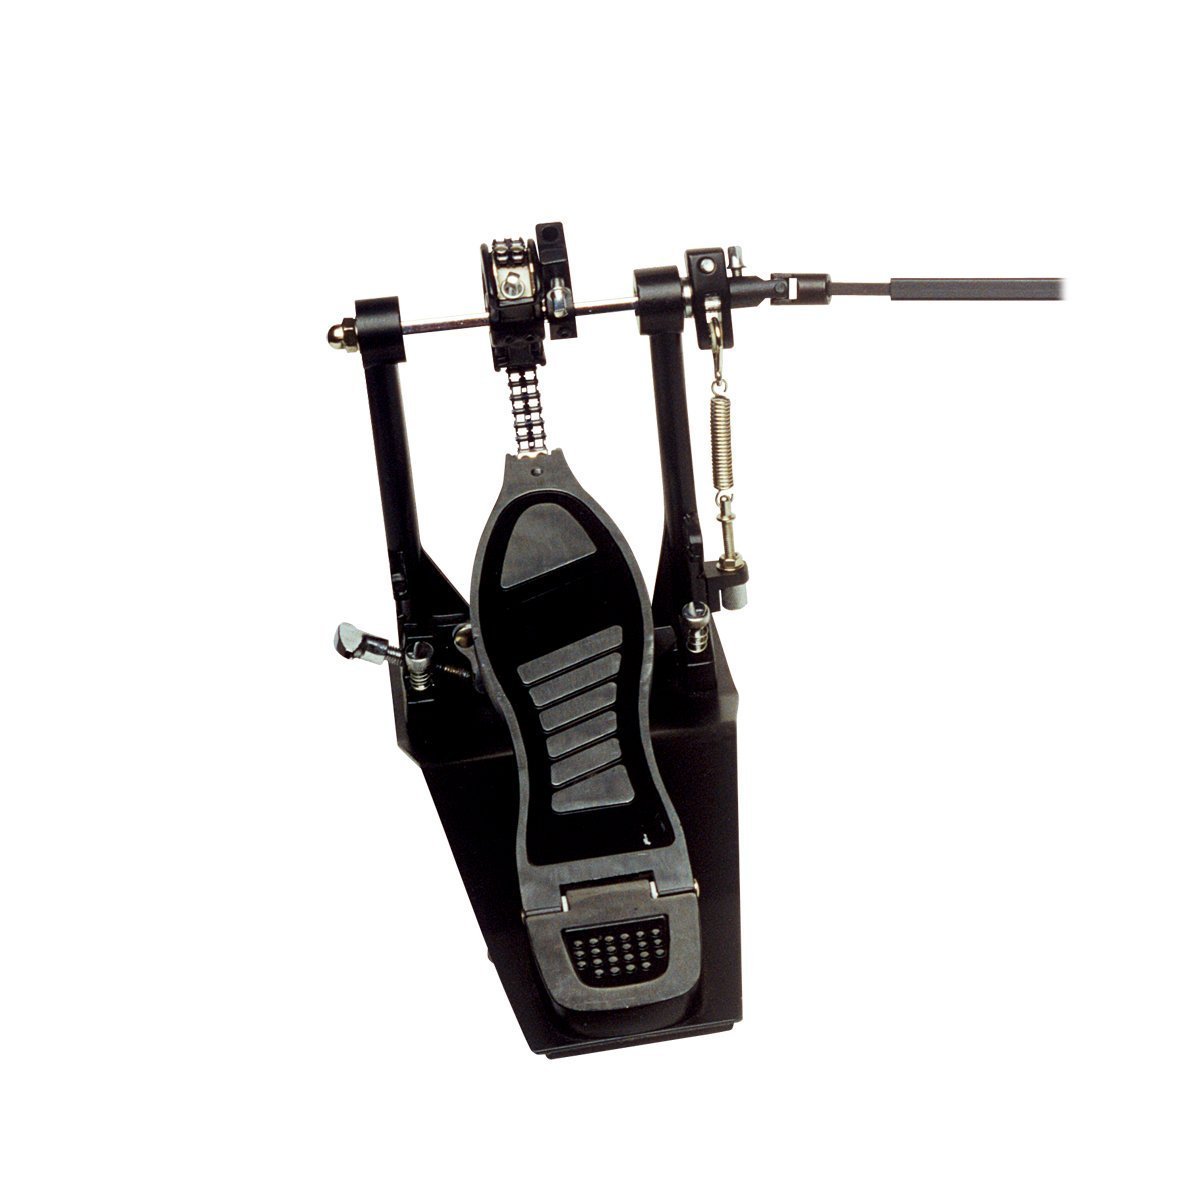 Sonic Drive Heavy Duty Double Bass Drum Pedal